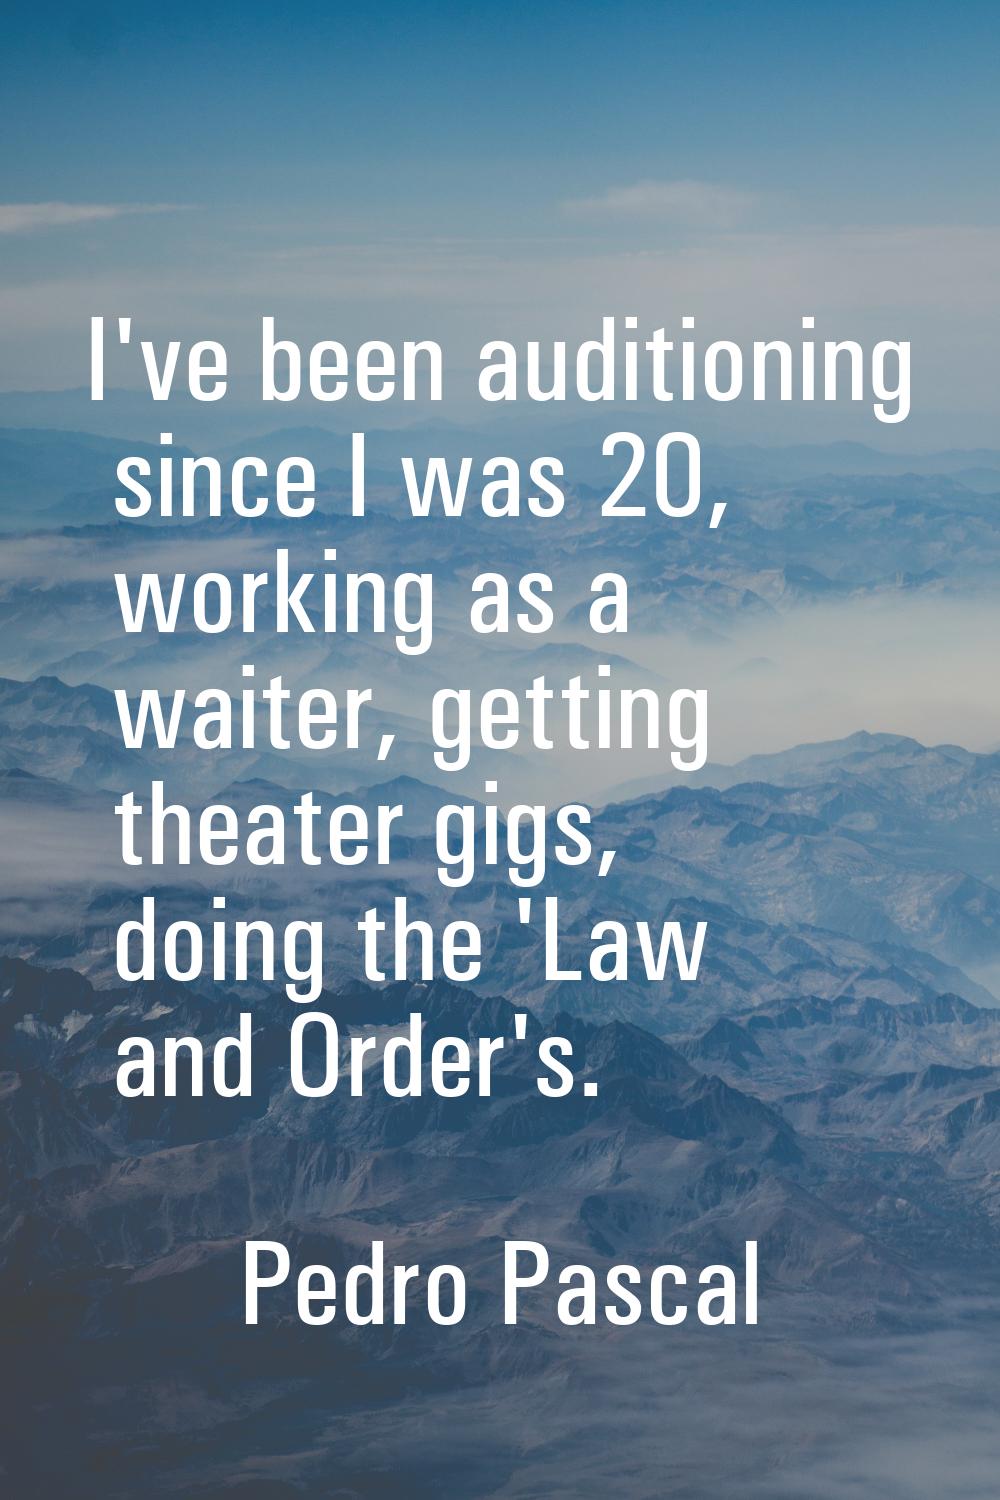 I've been auditioning since I was 20, working as a waiter, getting theater gigs, doing the 'Law and